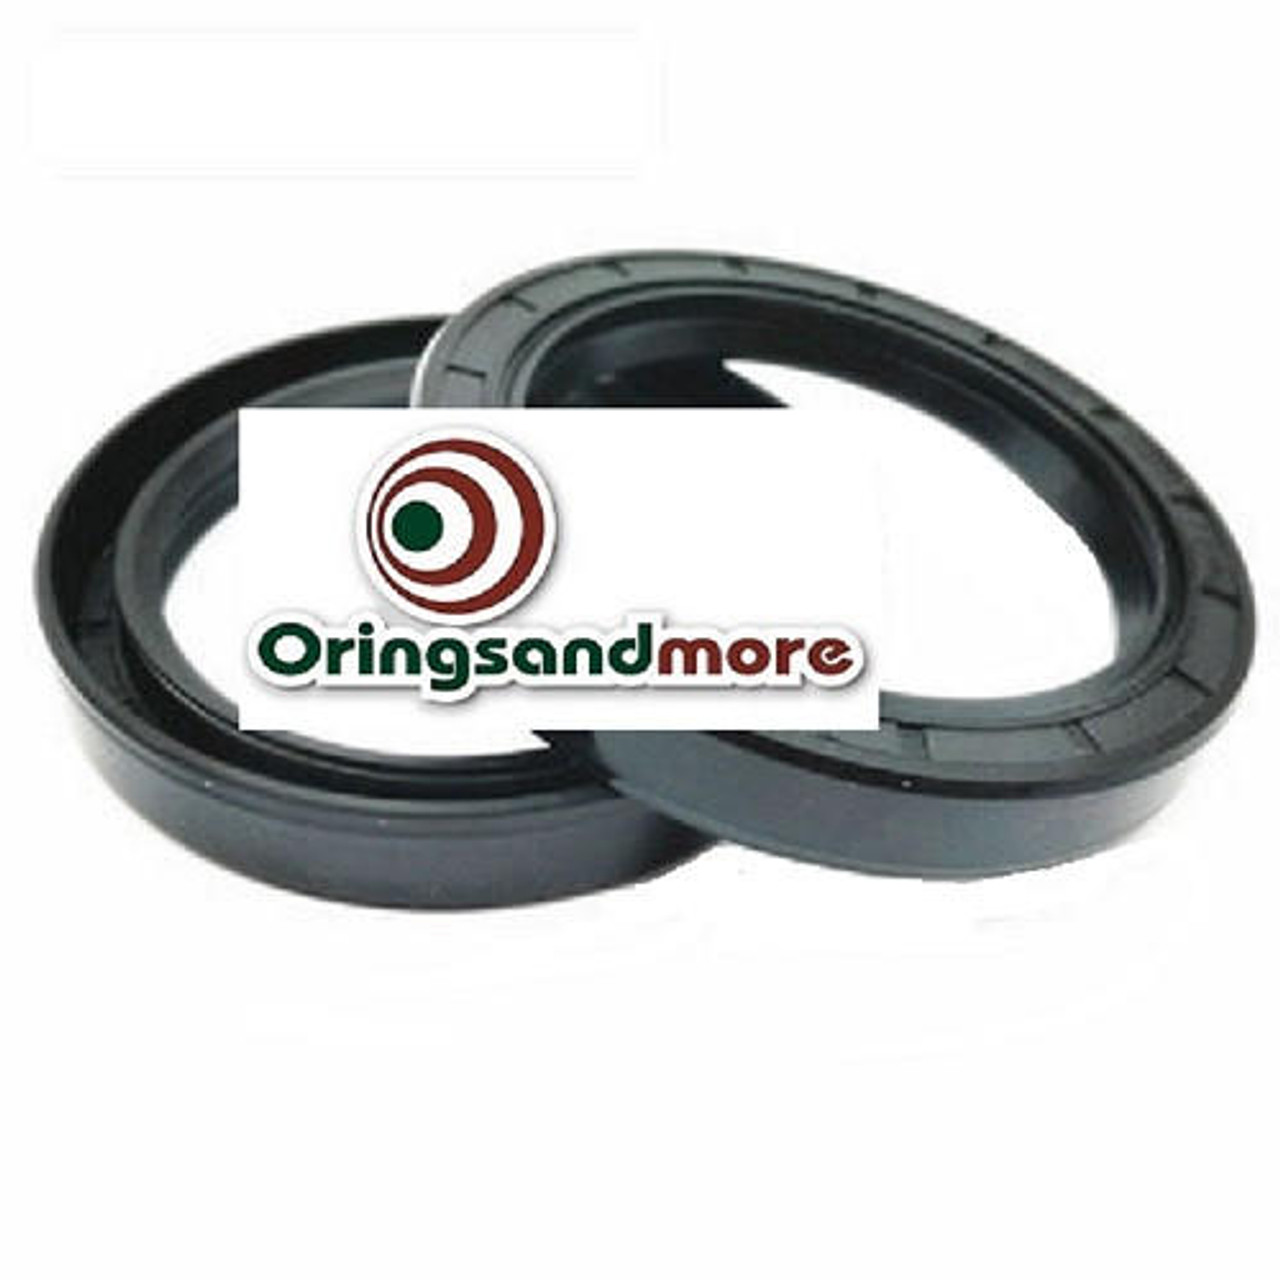 Metric Oil Shaft Seal 65 x 80 x 12mm Double Lip Price for 1 pc